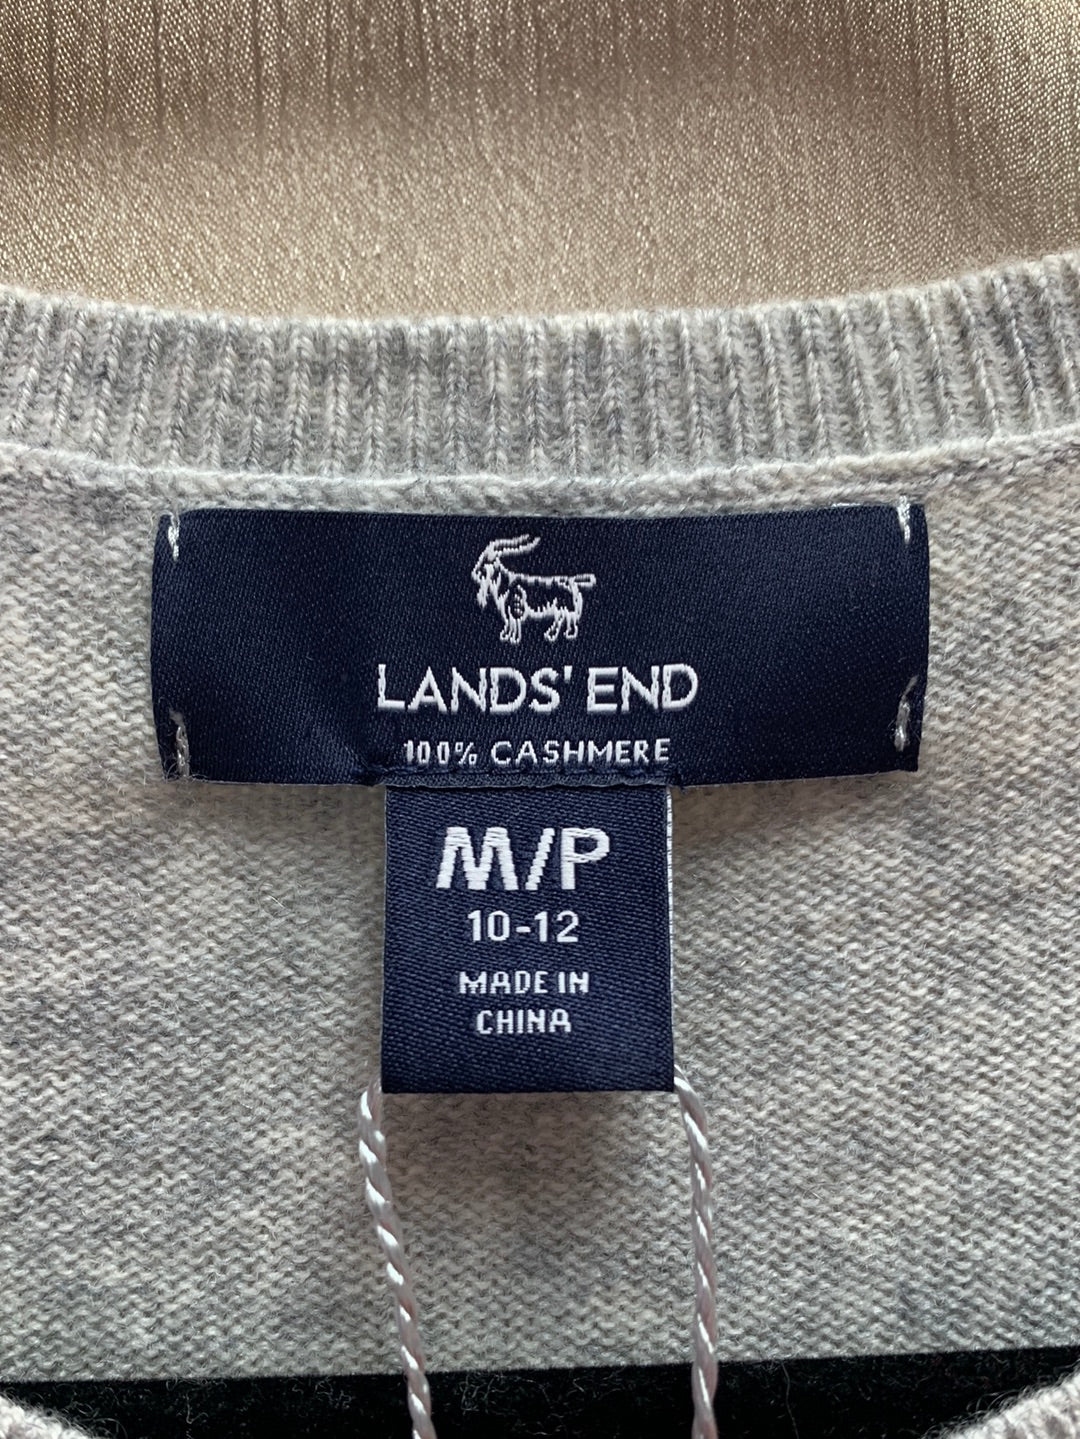 NWT - LANDS END heather grey Cashmere Button Front Cardigan - M/P | 10-12